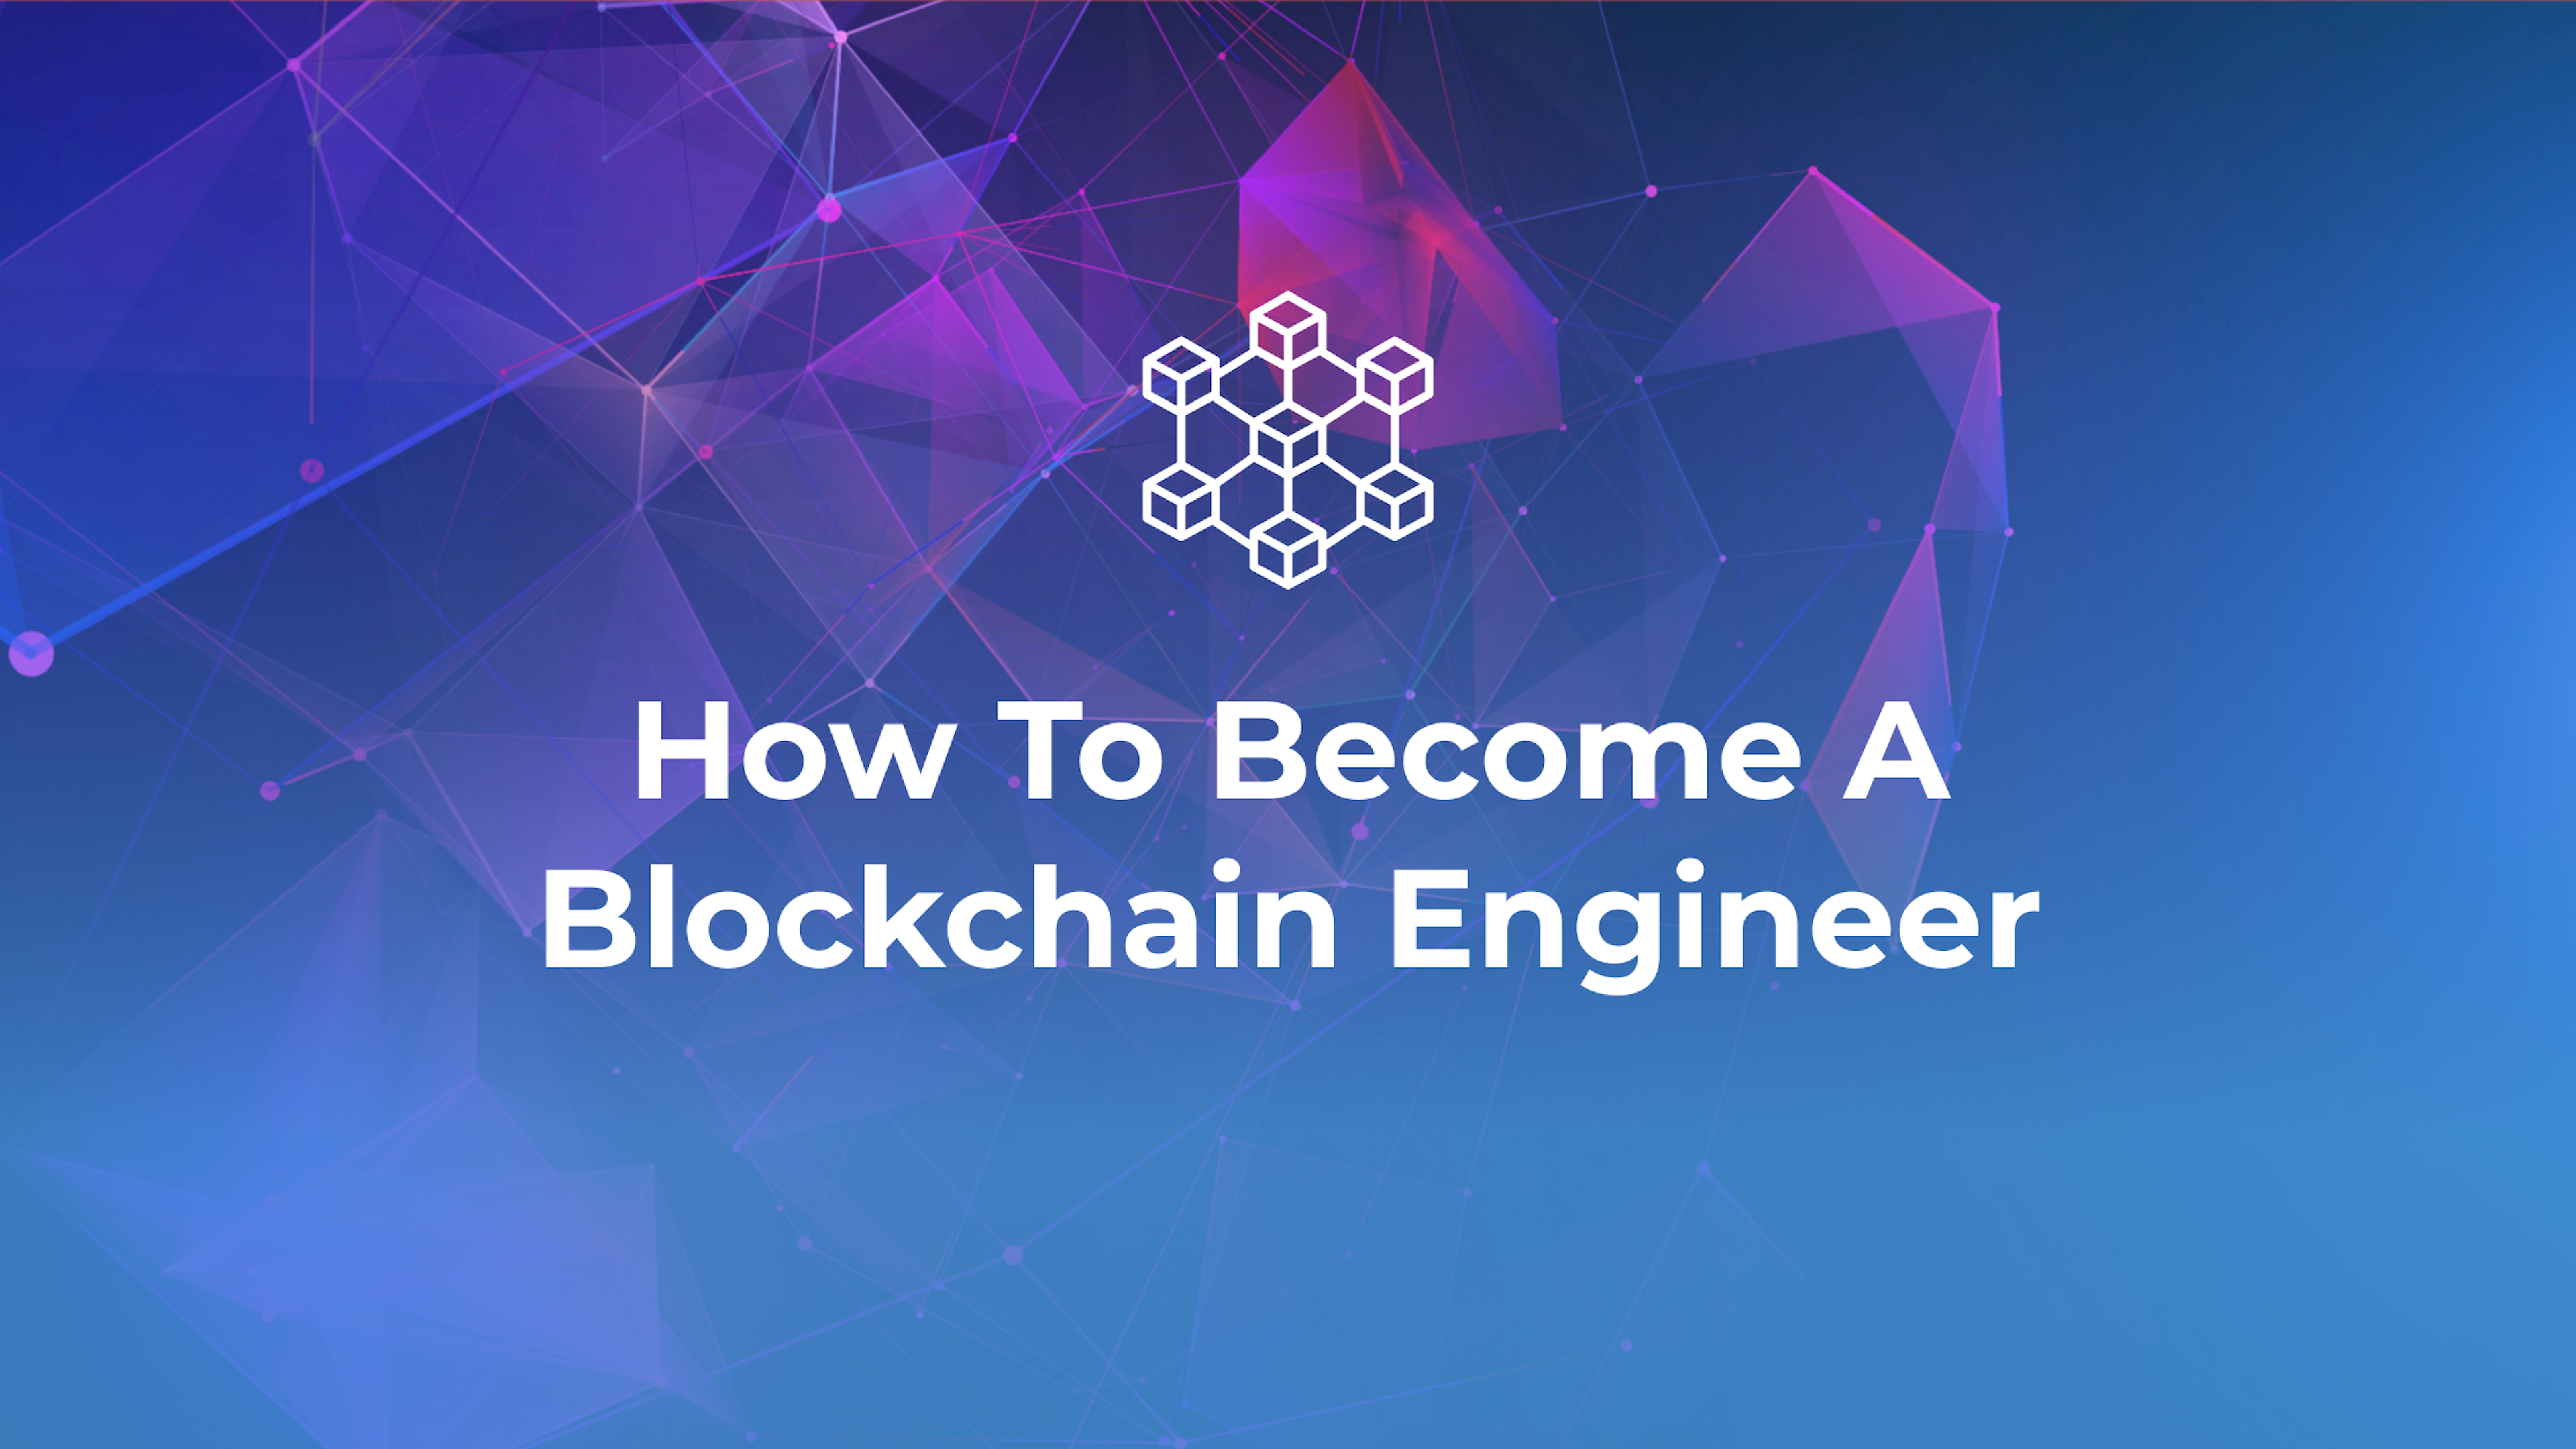 How To Become A Blockchain Engineer | A Step-By-Step Complete Guide